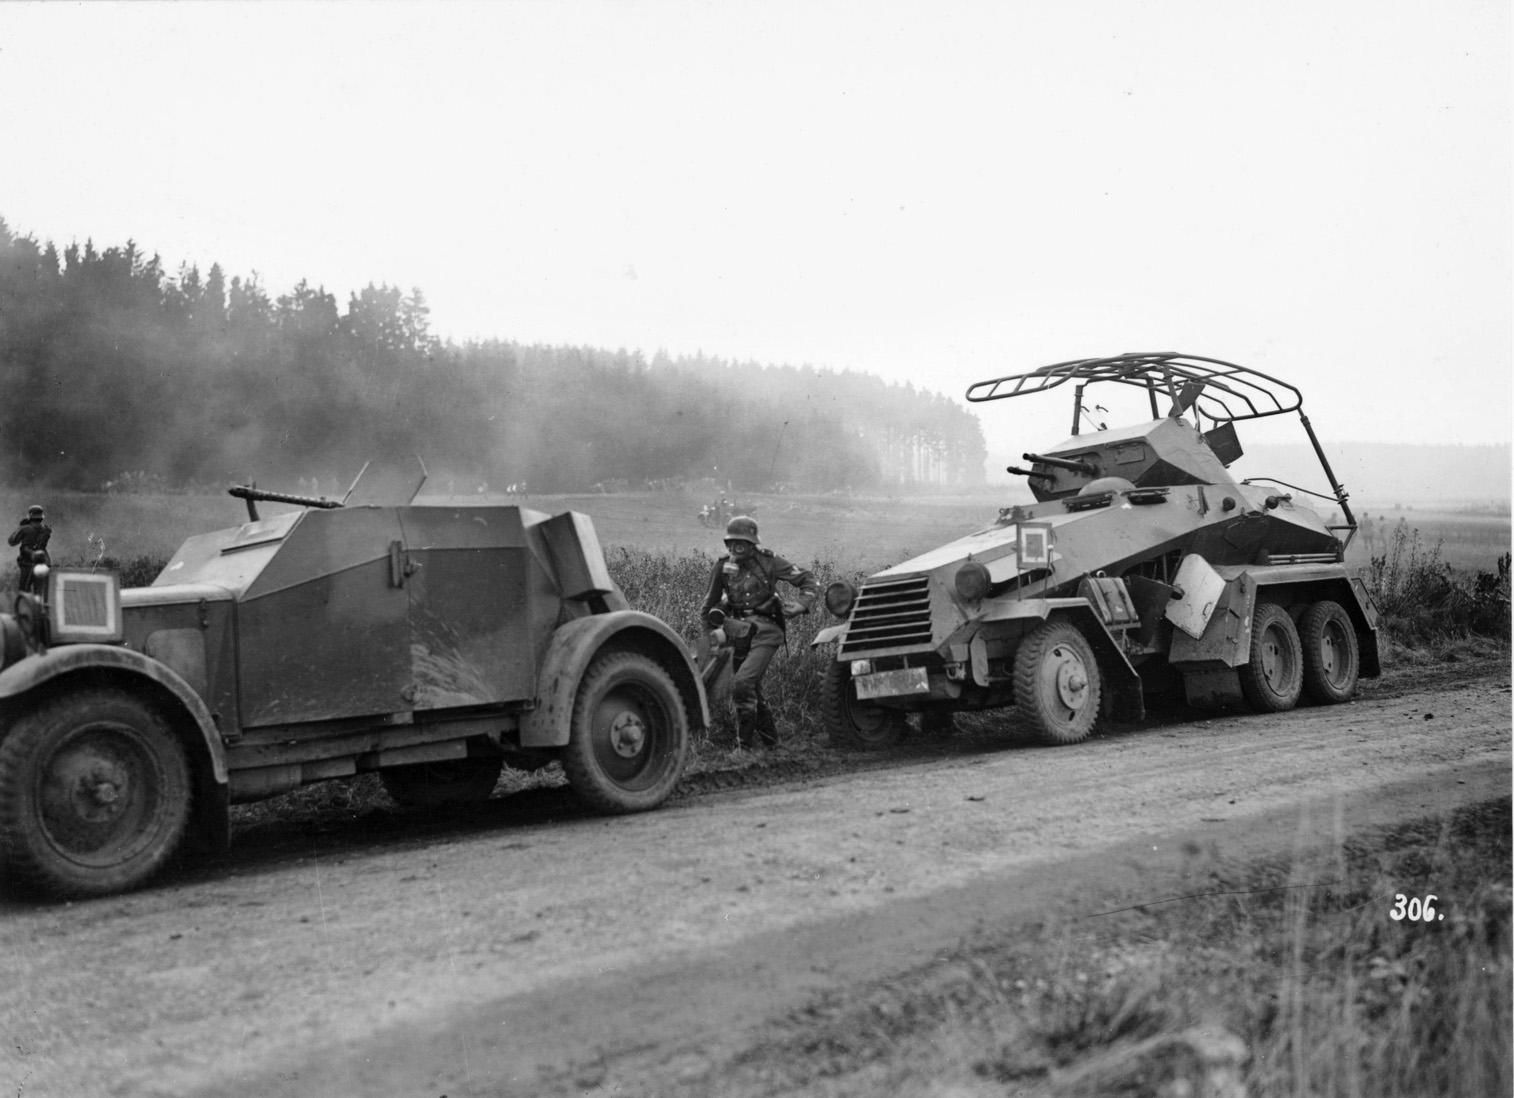 Reconnaissance troops participate in an exercise in 1936 with an SdKfz.13 open-topped armored scout car armed with an MG-13 machine gun and a SdKfz.232 six-wheeled heavy armored scout vehicle featuring a fully rotating turret with a 20mm autocannon and an MG-13 machine gun.